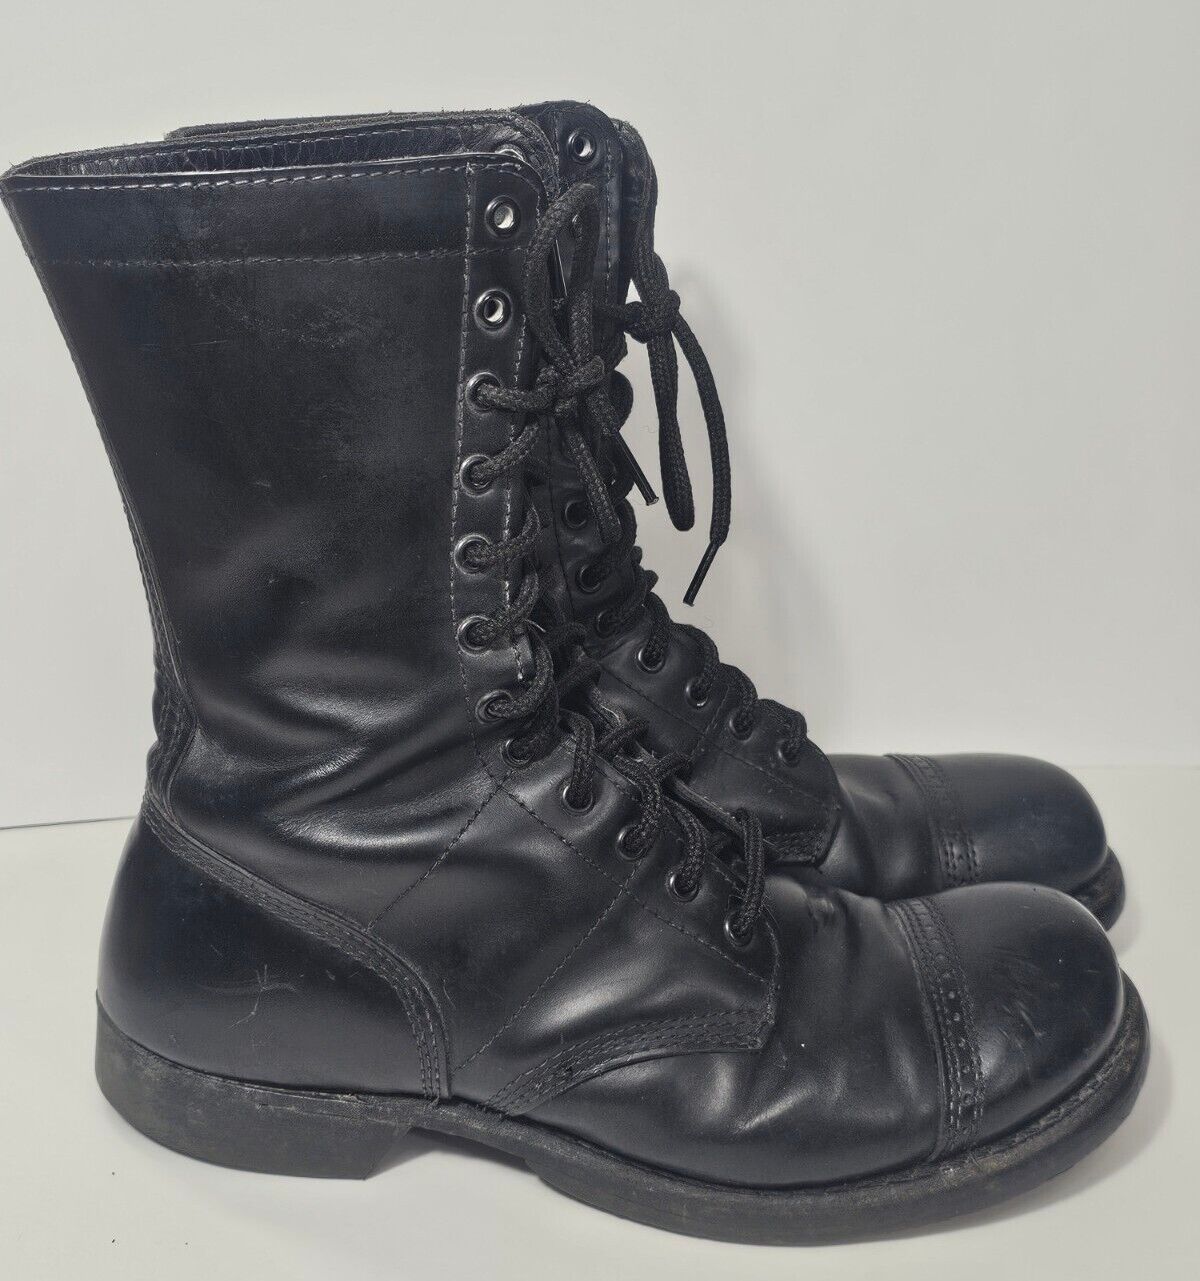 WW2 USA Army Paratrooper Jump Boots Corcoran Boots~Name Inside 12.5 M